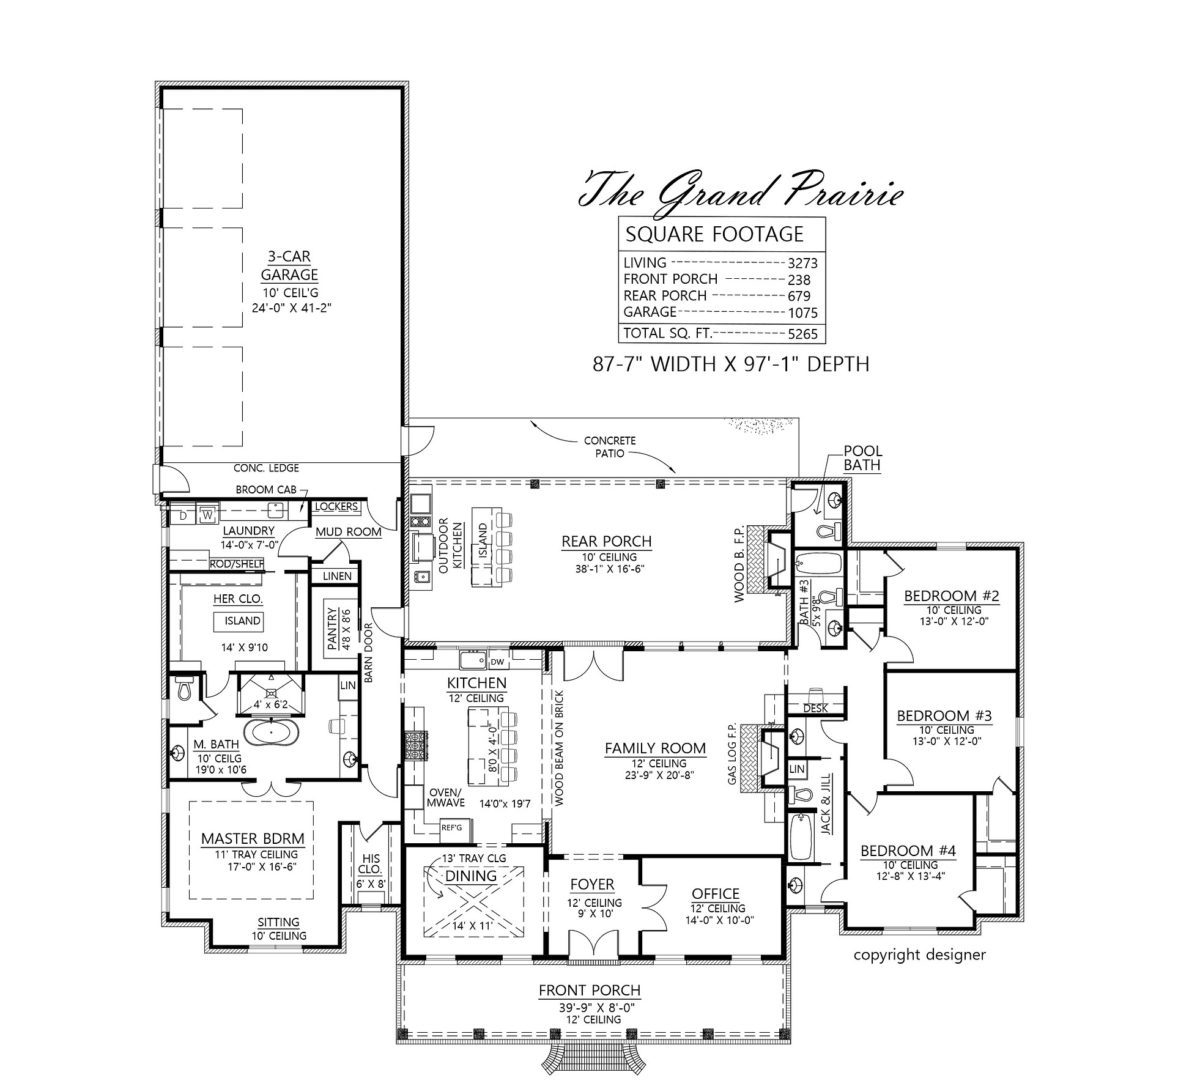 Is The Grand Prairie design for you?